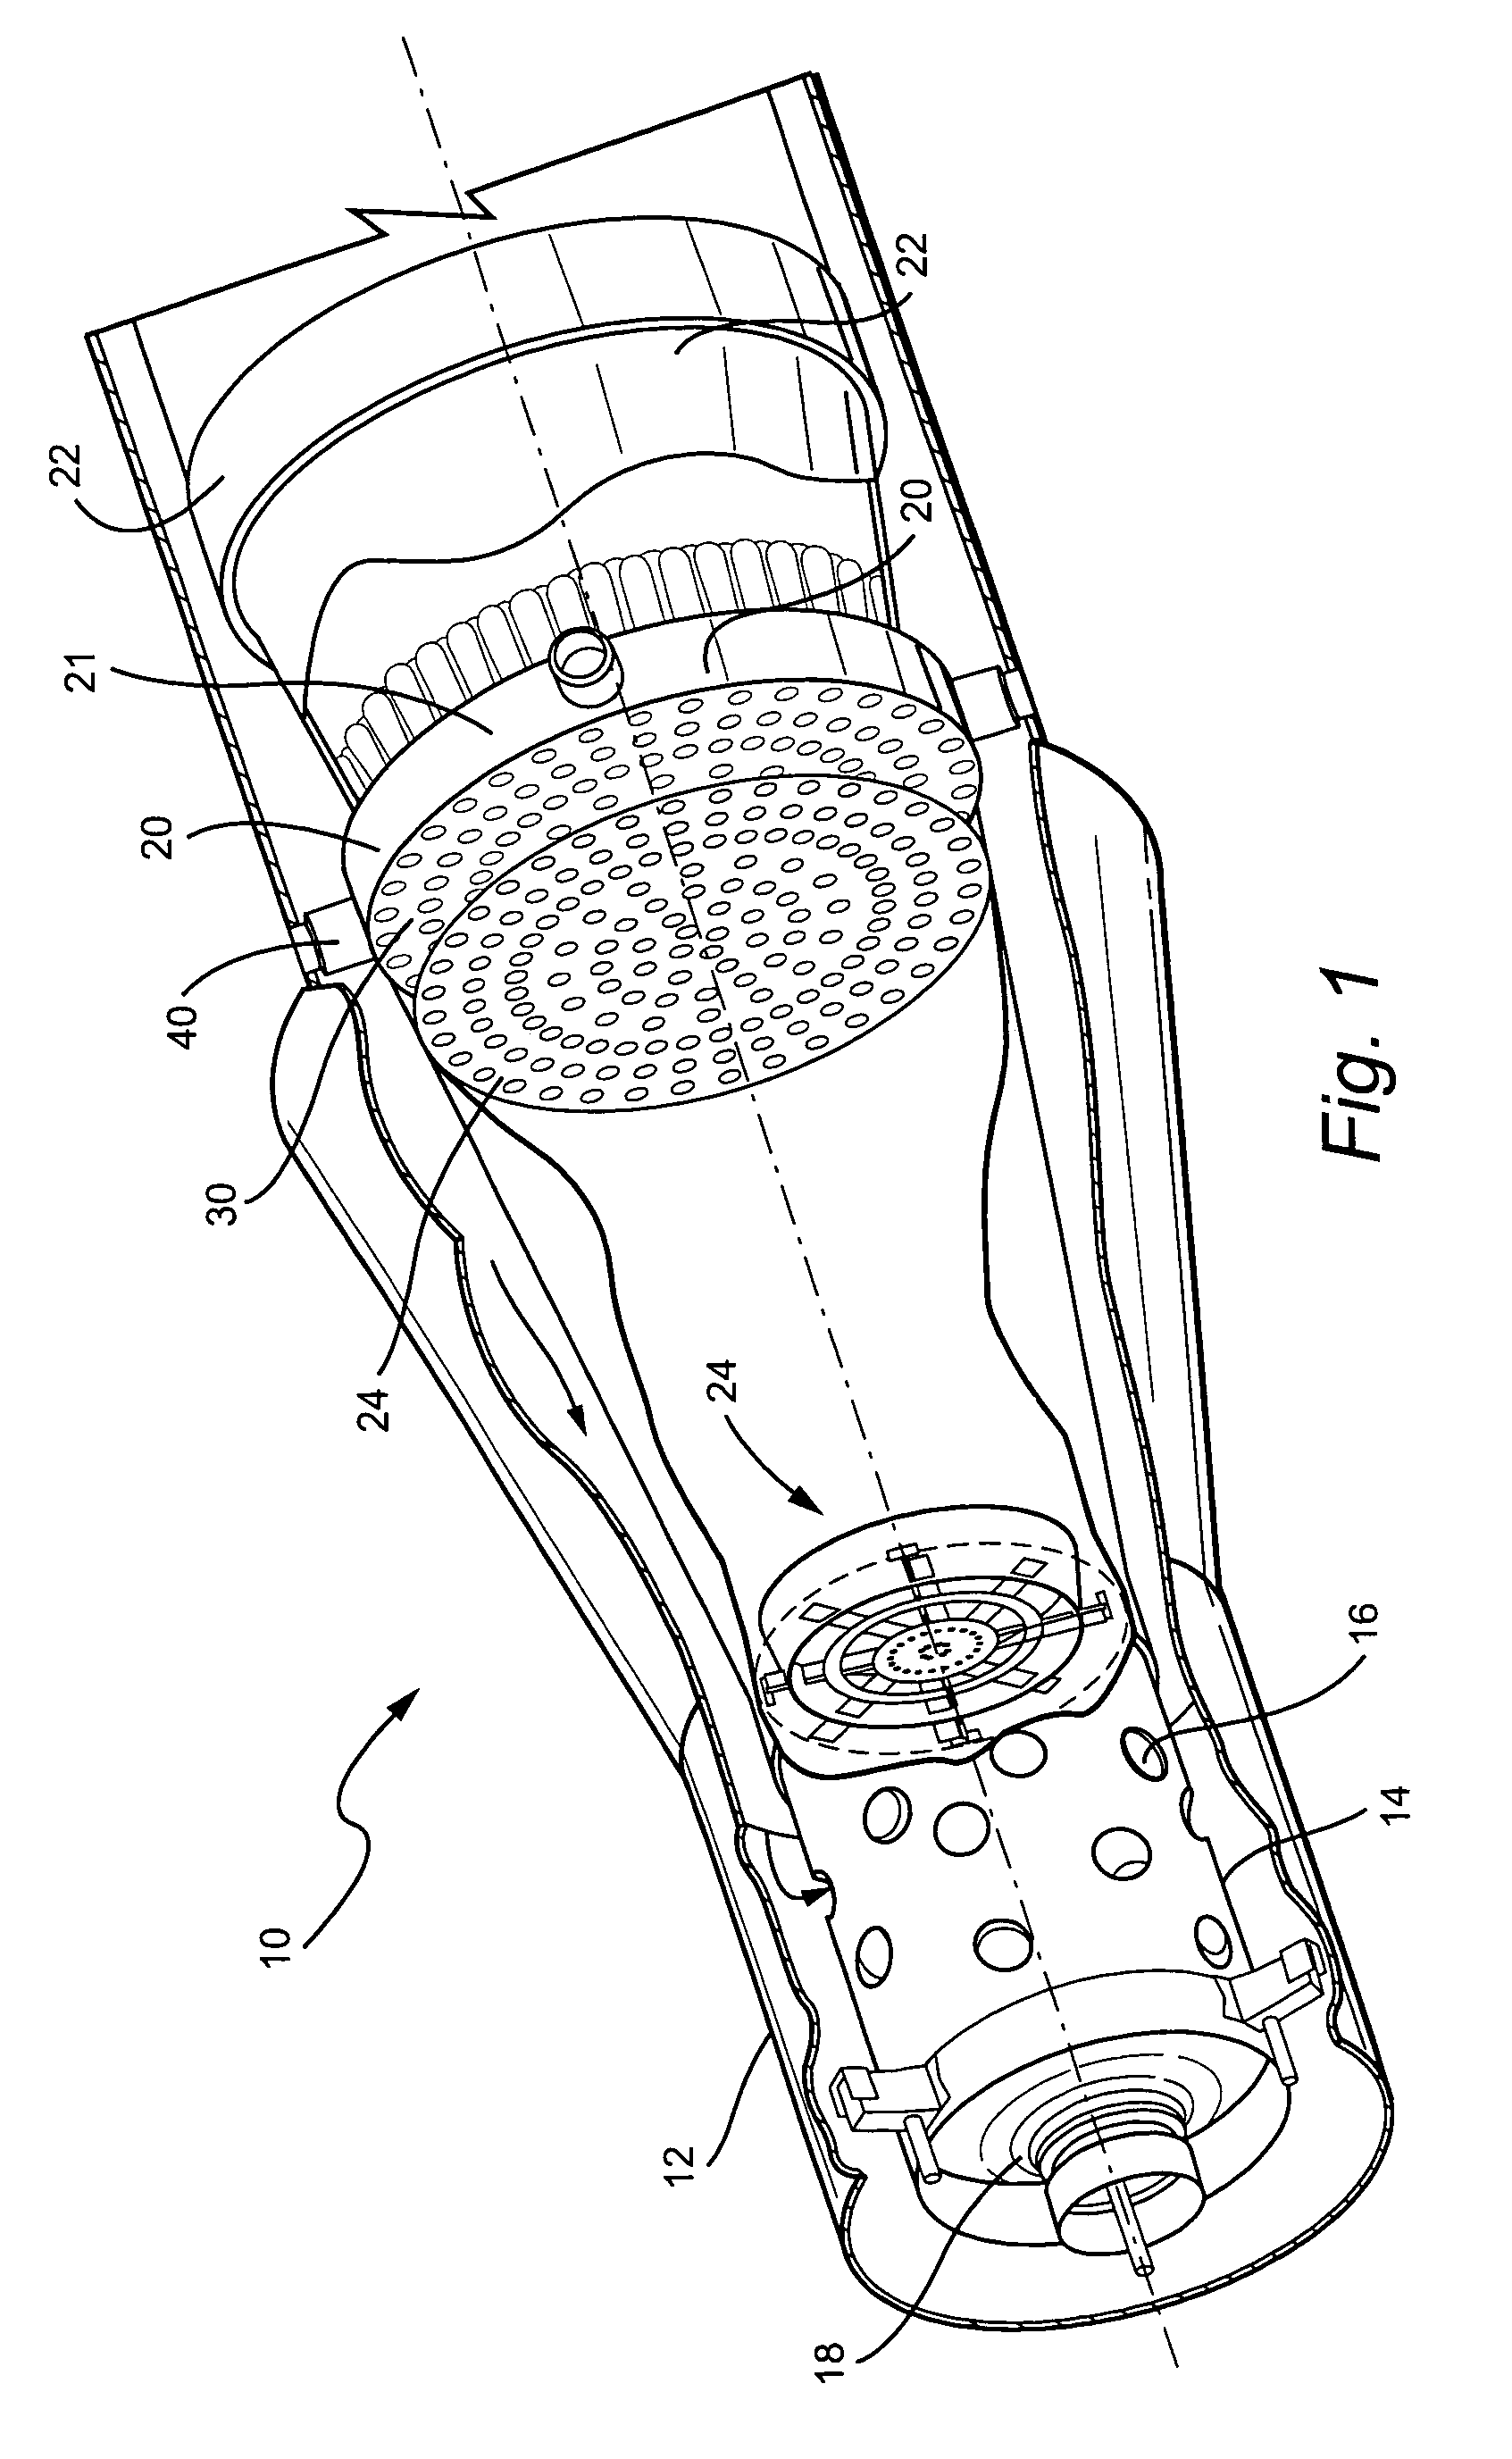 Multi-sided diffuser for a venturi in a fuel injector for a gas turbine